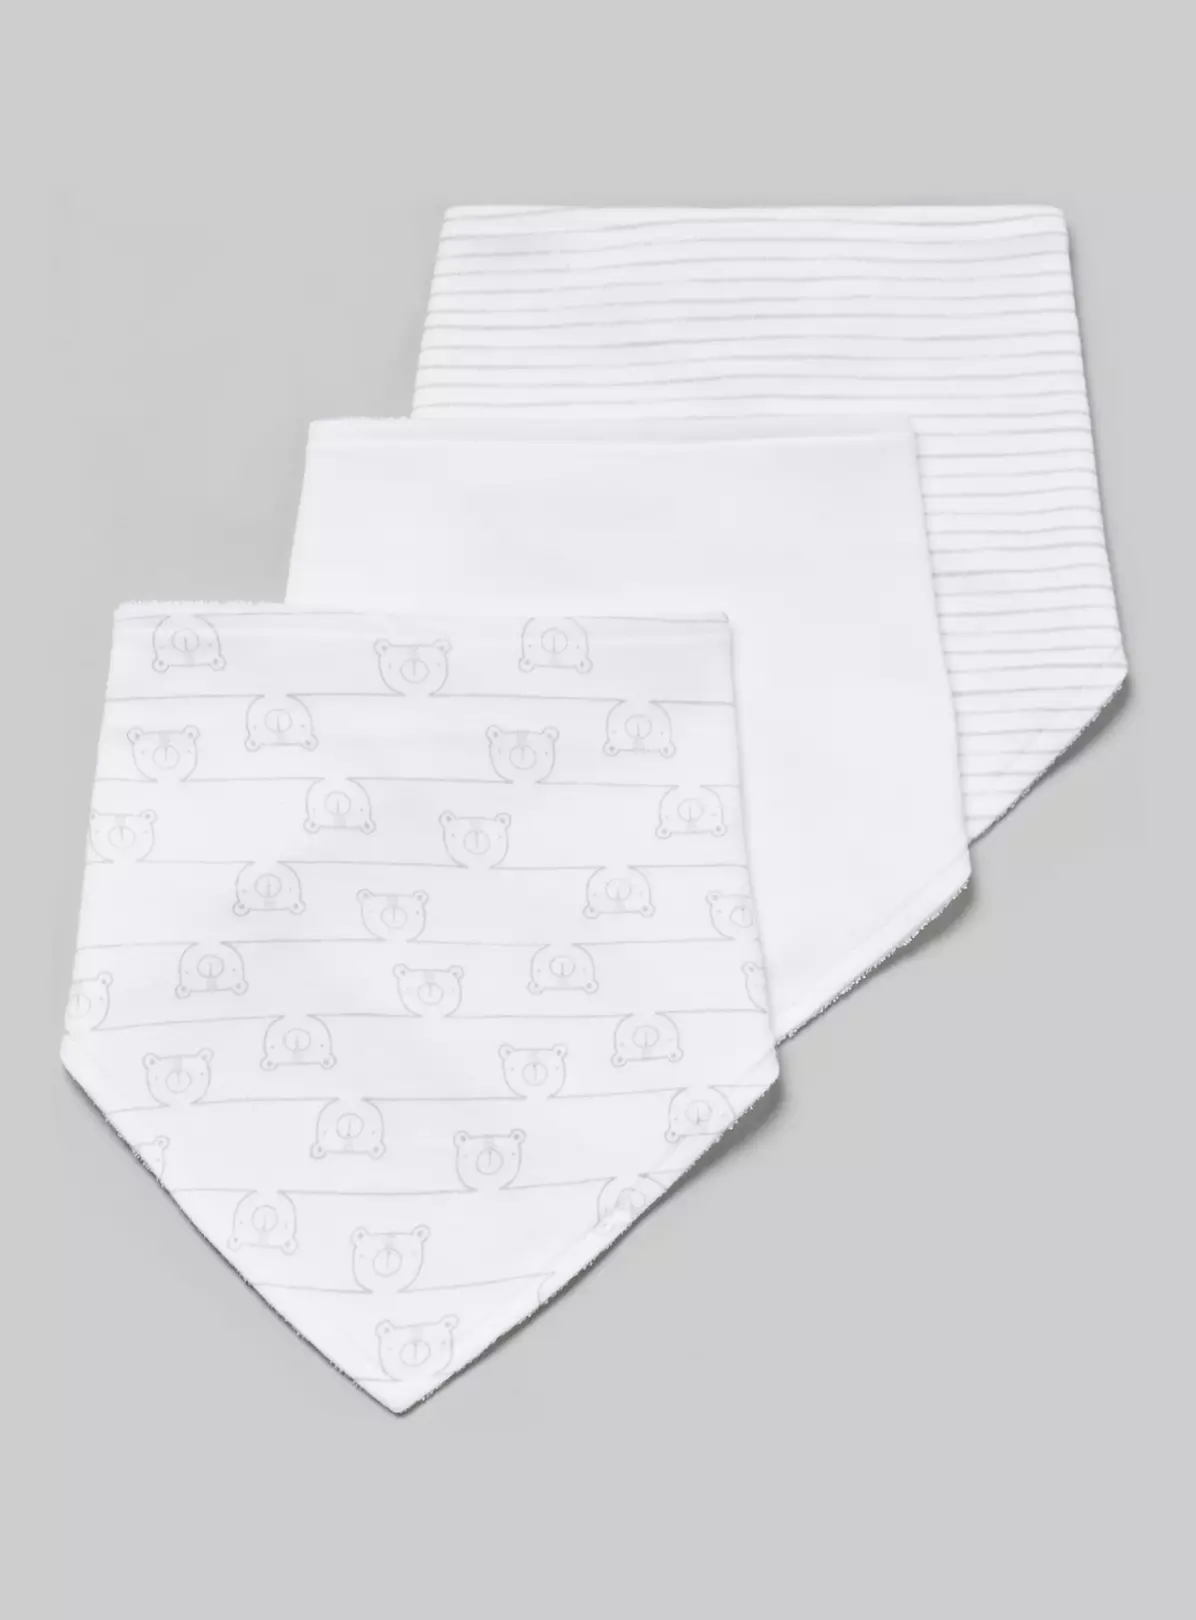 White Printed Hanky Bibs 3 Pack – One Size